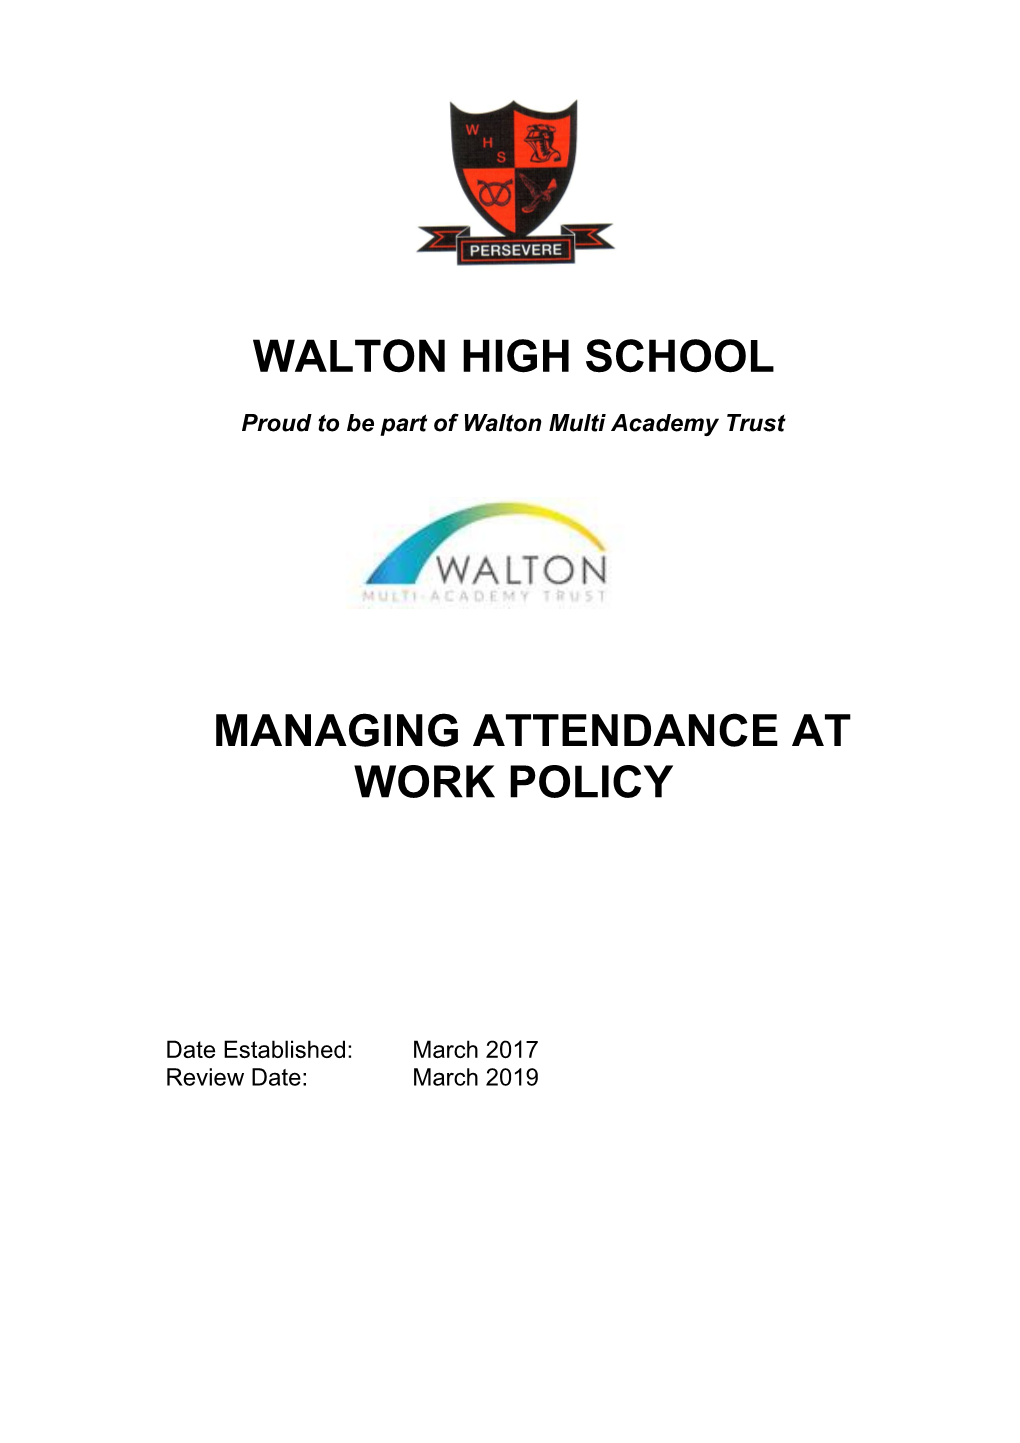 Proud to Be Part of Walton Multi Academy Trust